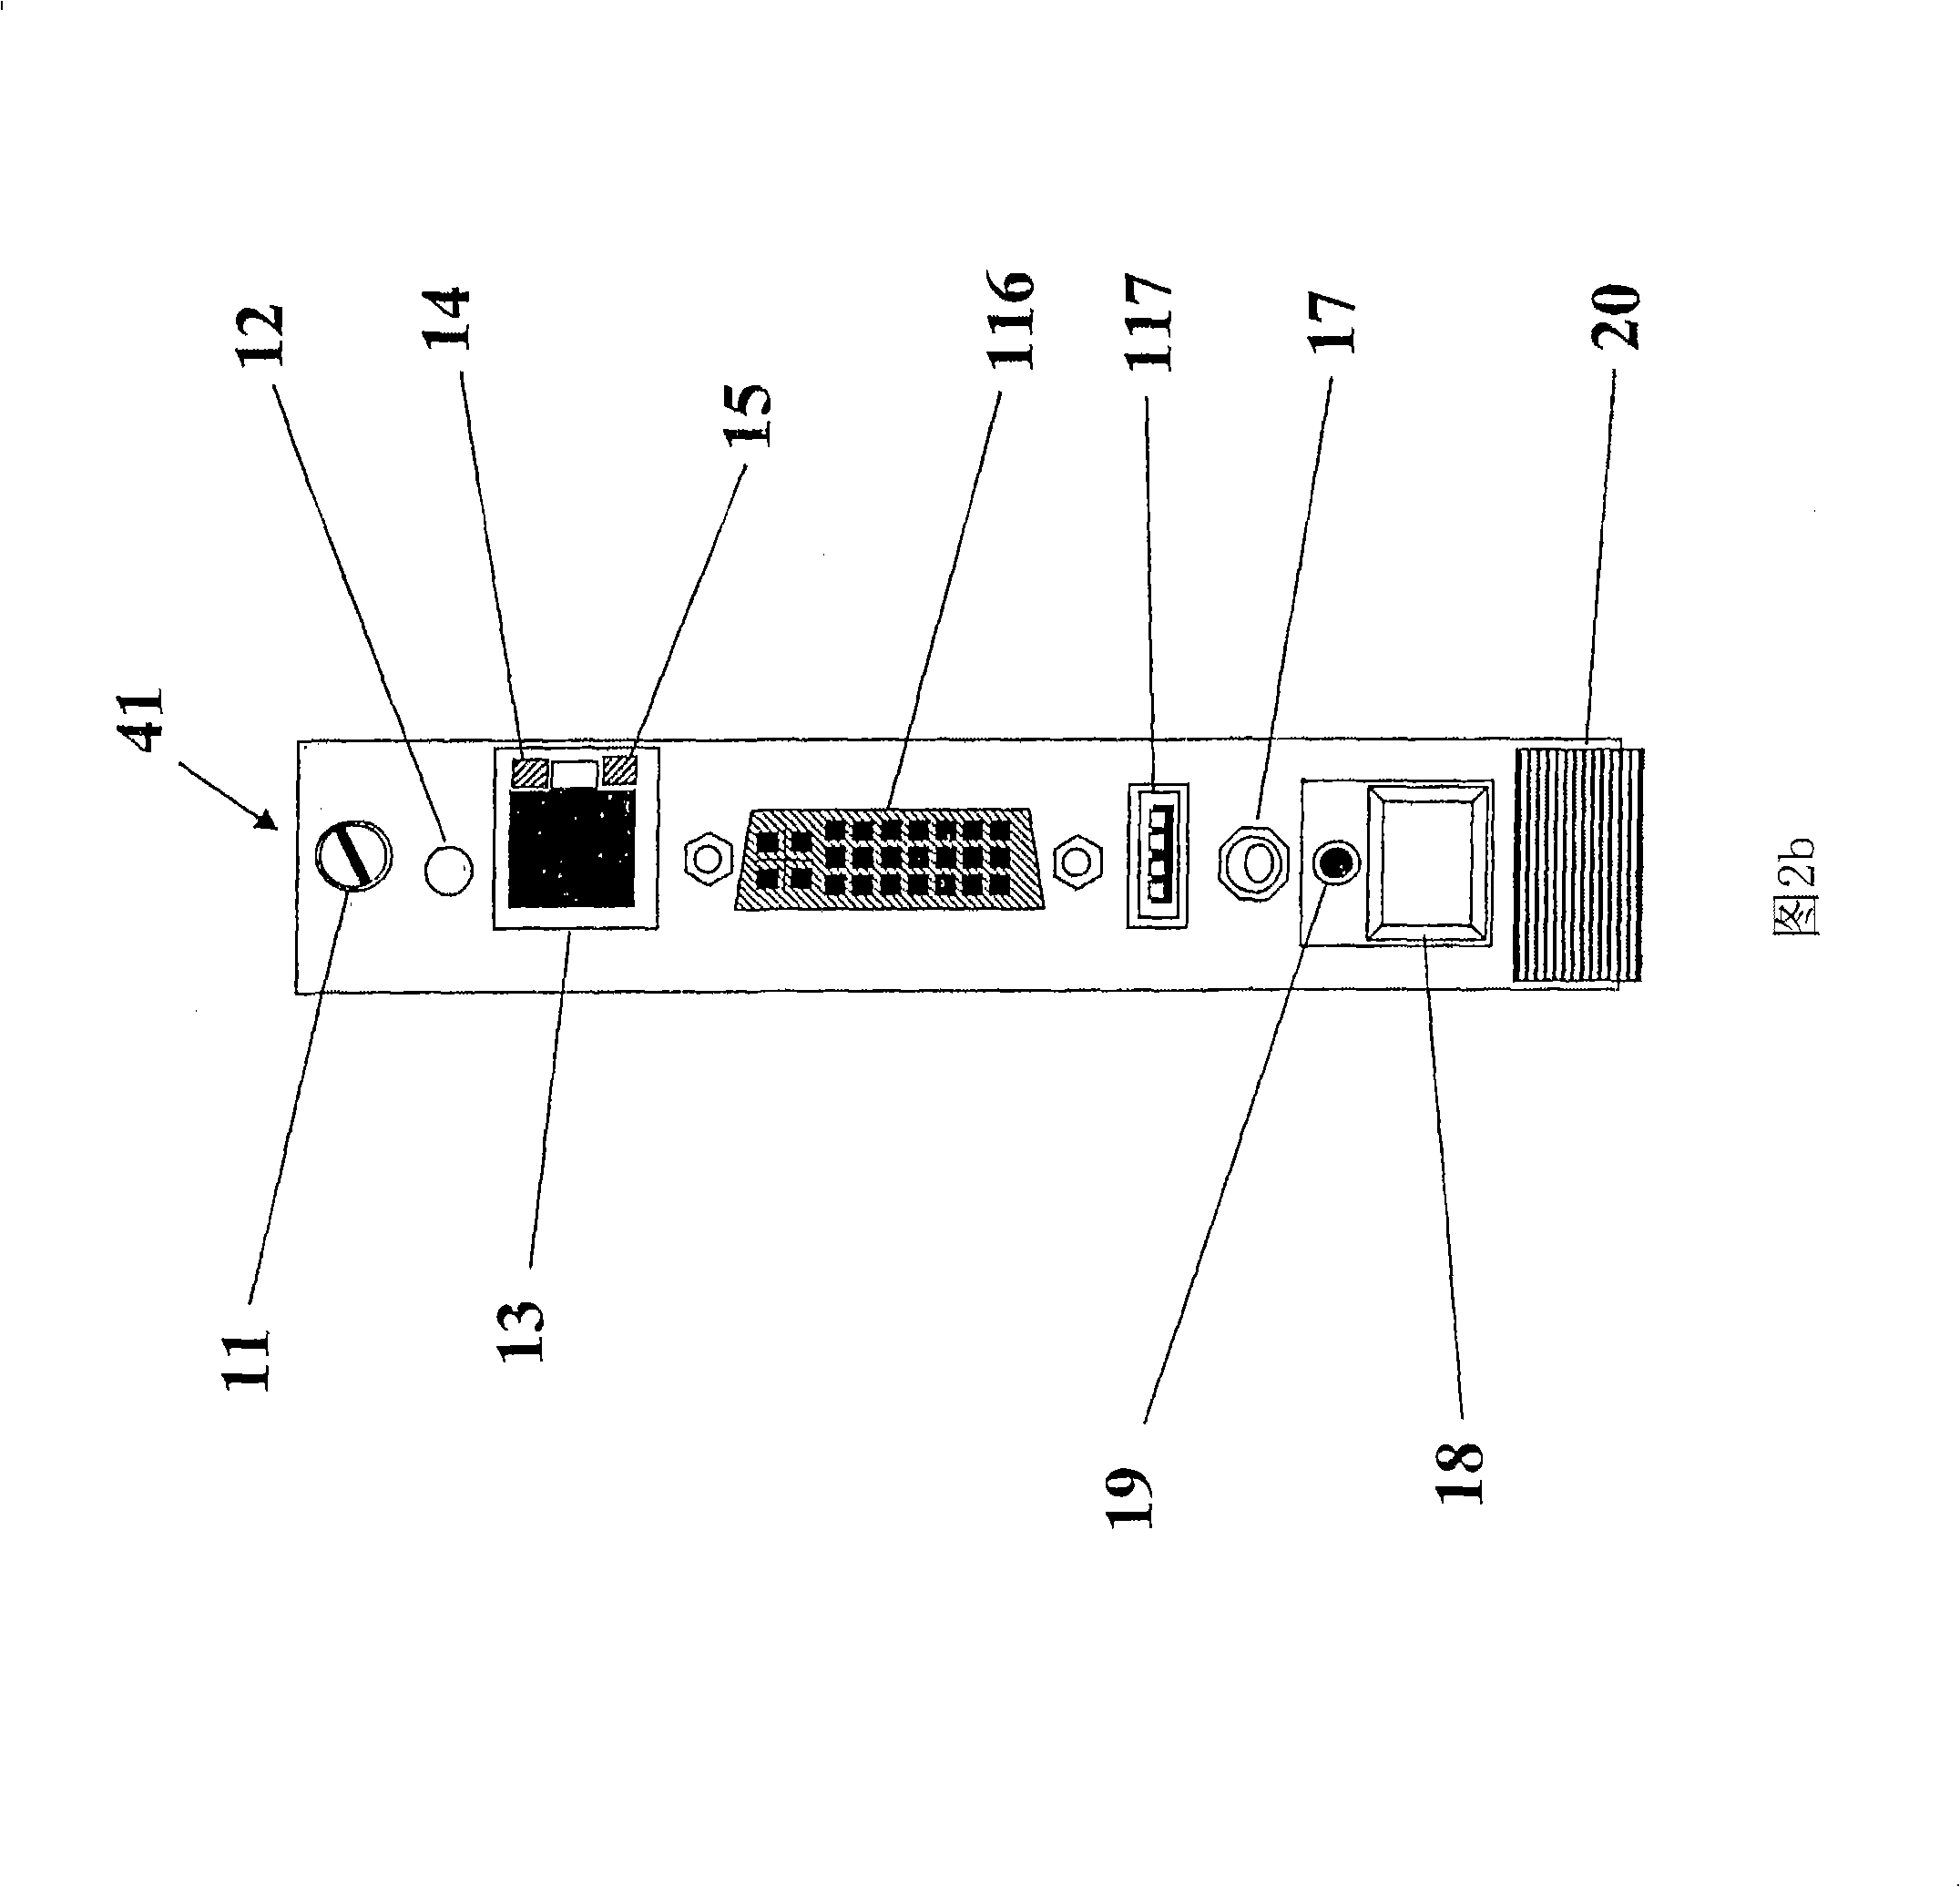 Apparatus, method and system of thin client blade modularity